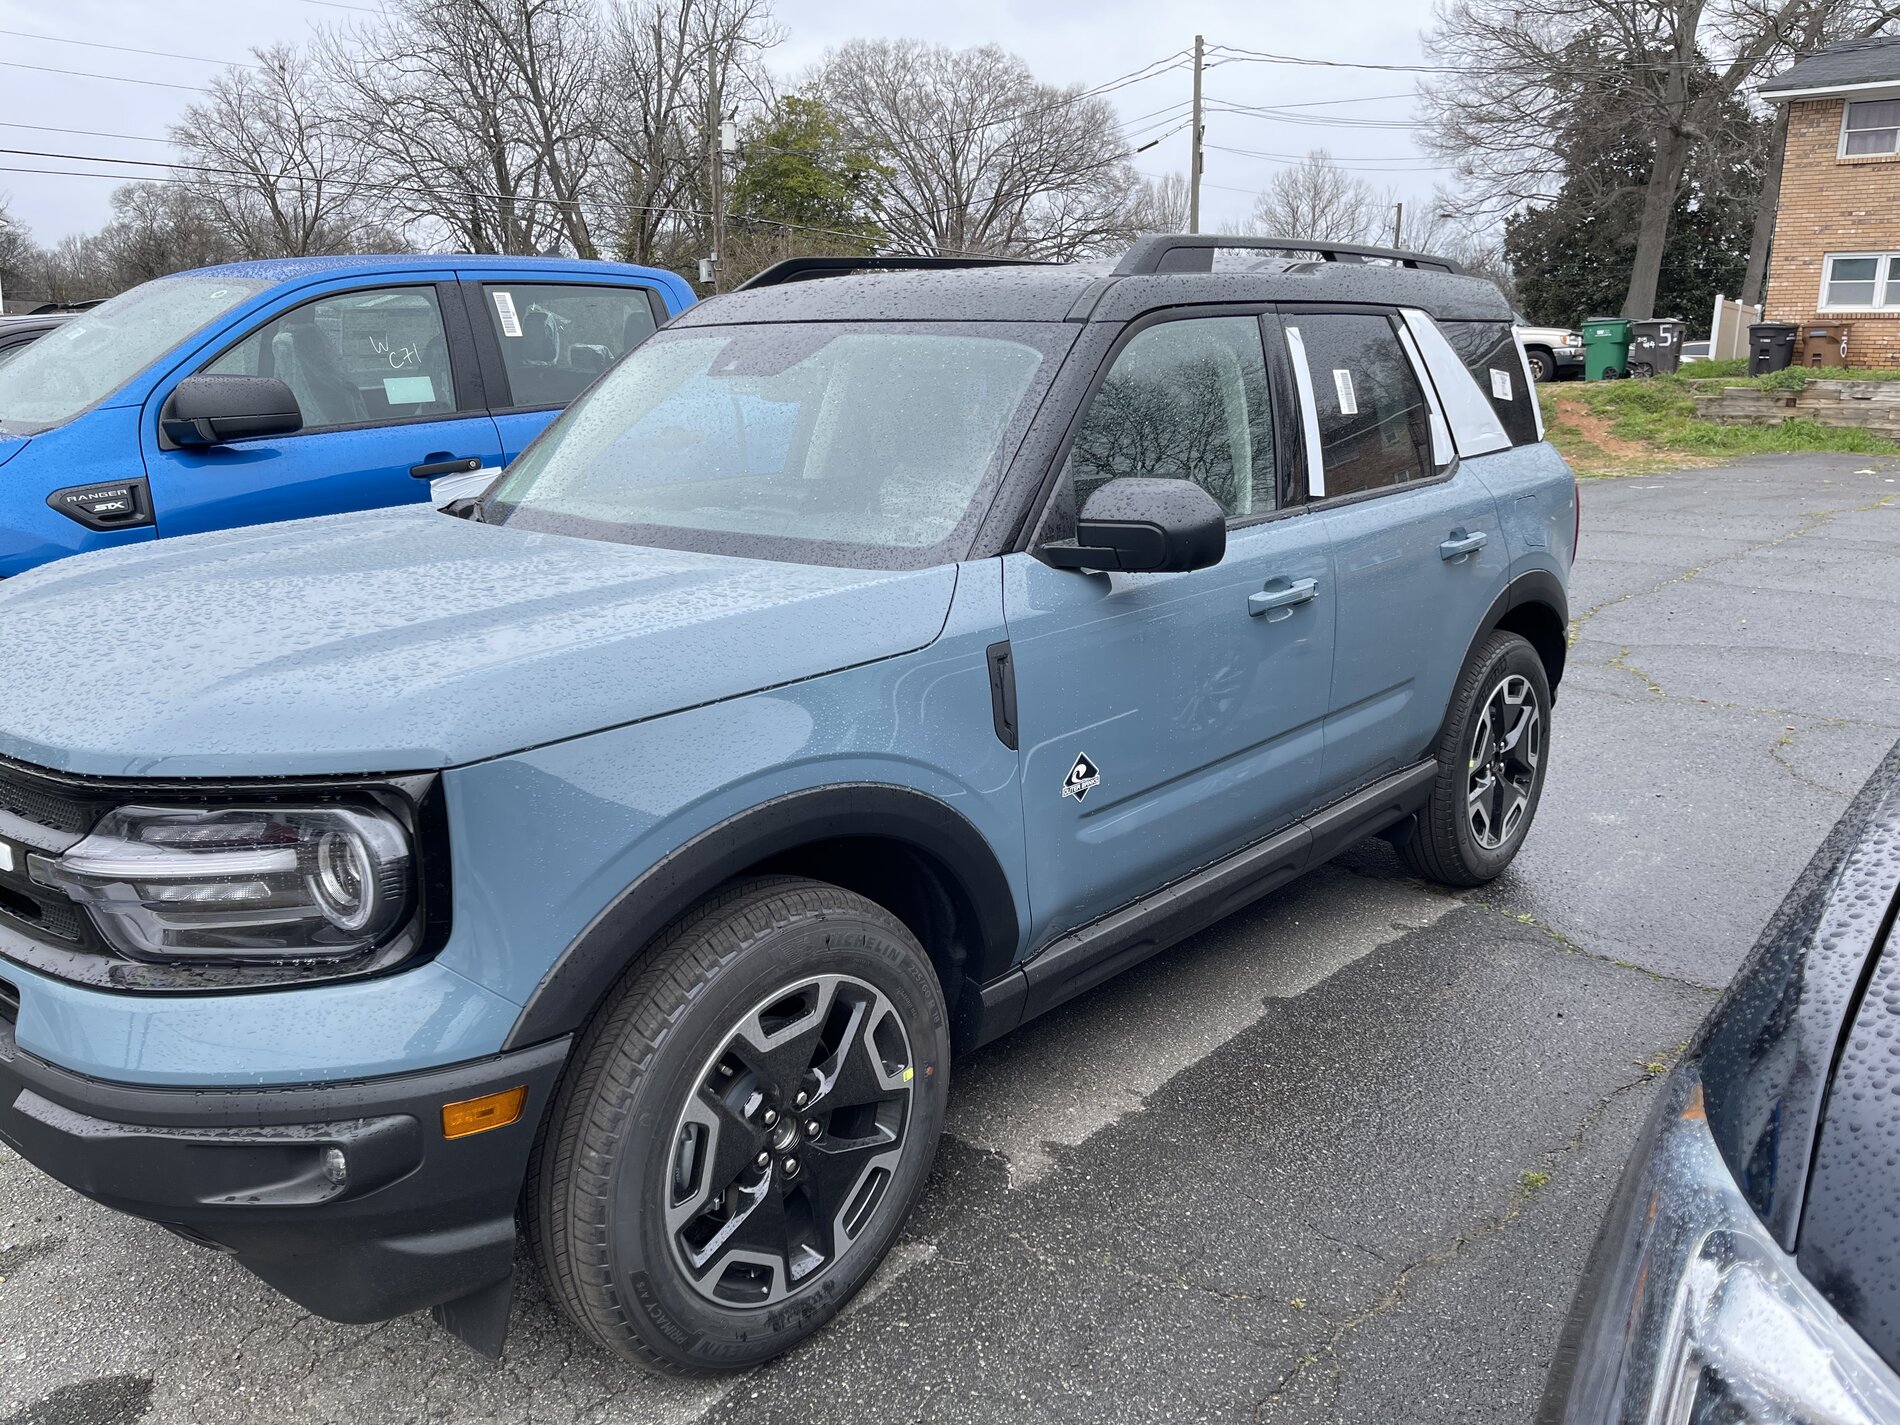 Ford Bronco CACTUS GRAY THREAD!!!! if you’re choosing cactus gray lemme know. I think it’s the best color available at the moment. A651A790-E3AC-4B3A-A6DA-1F176432FD55